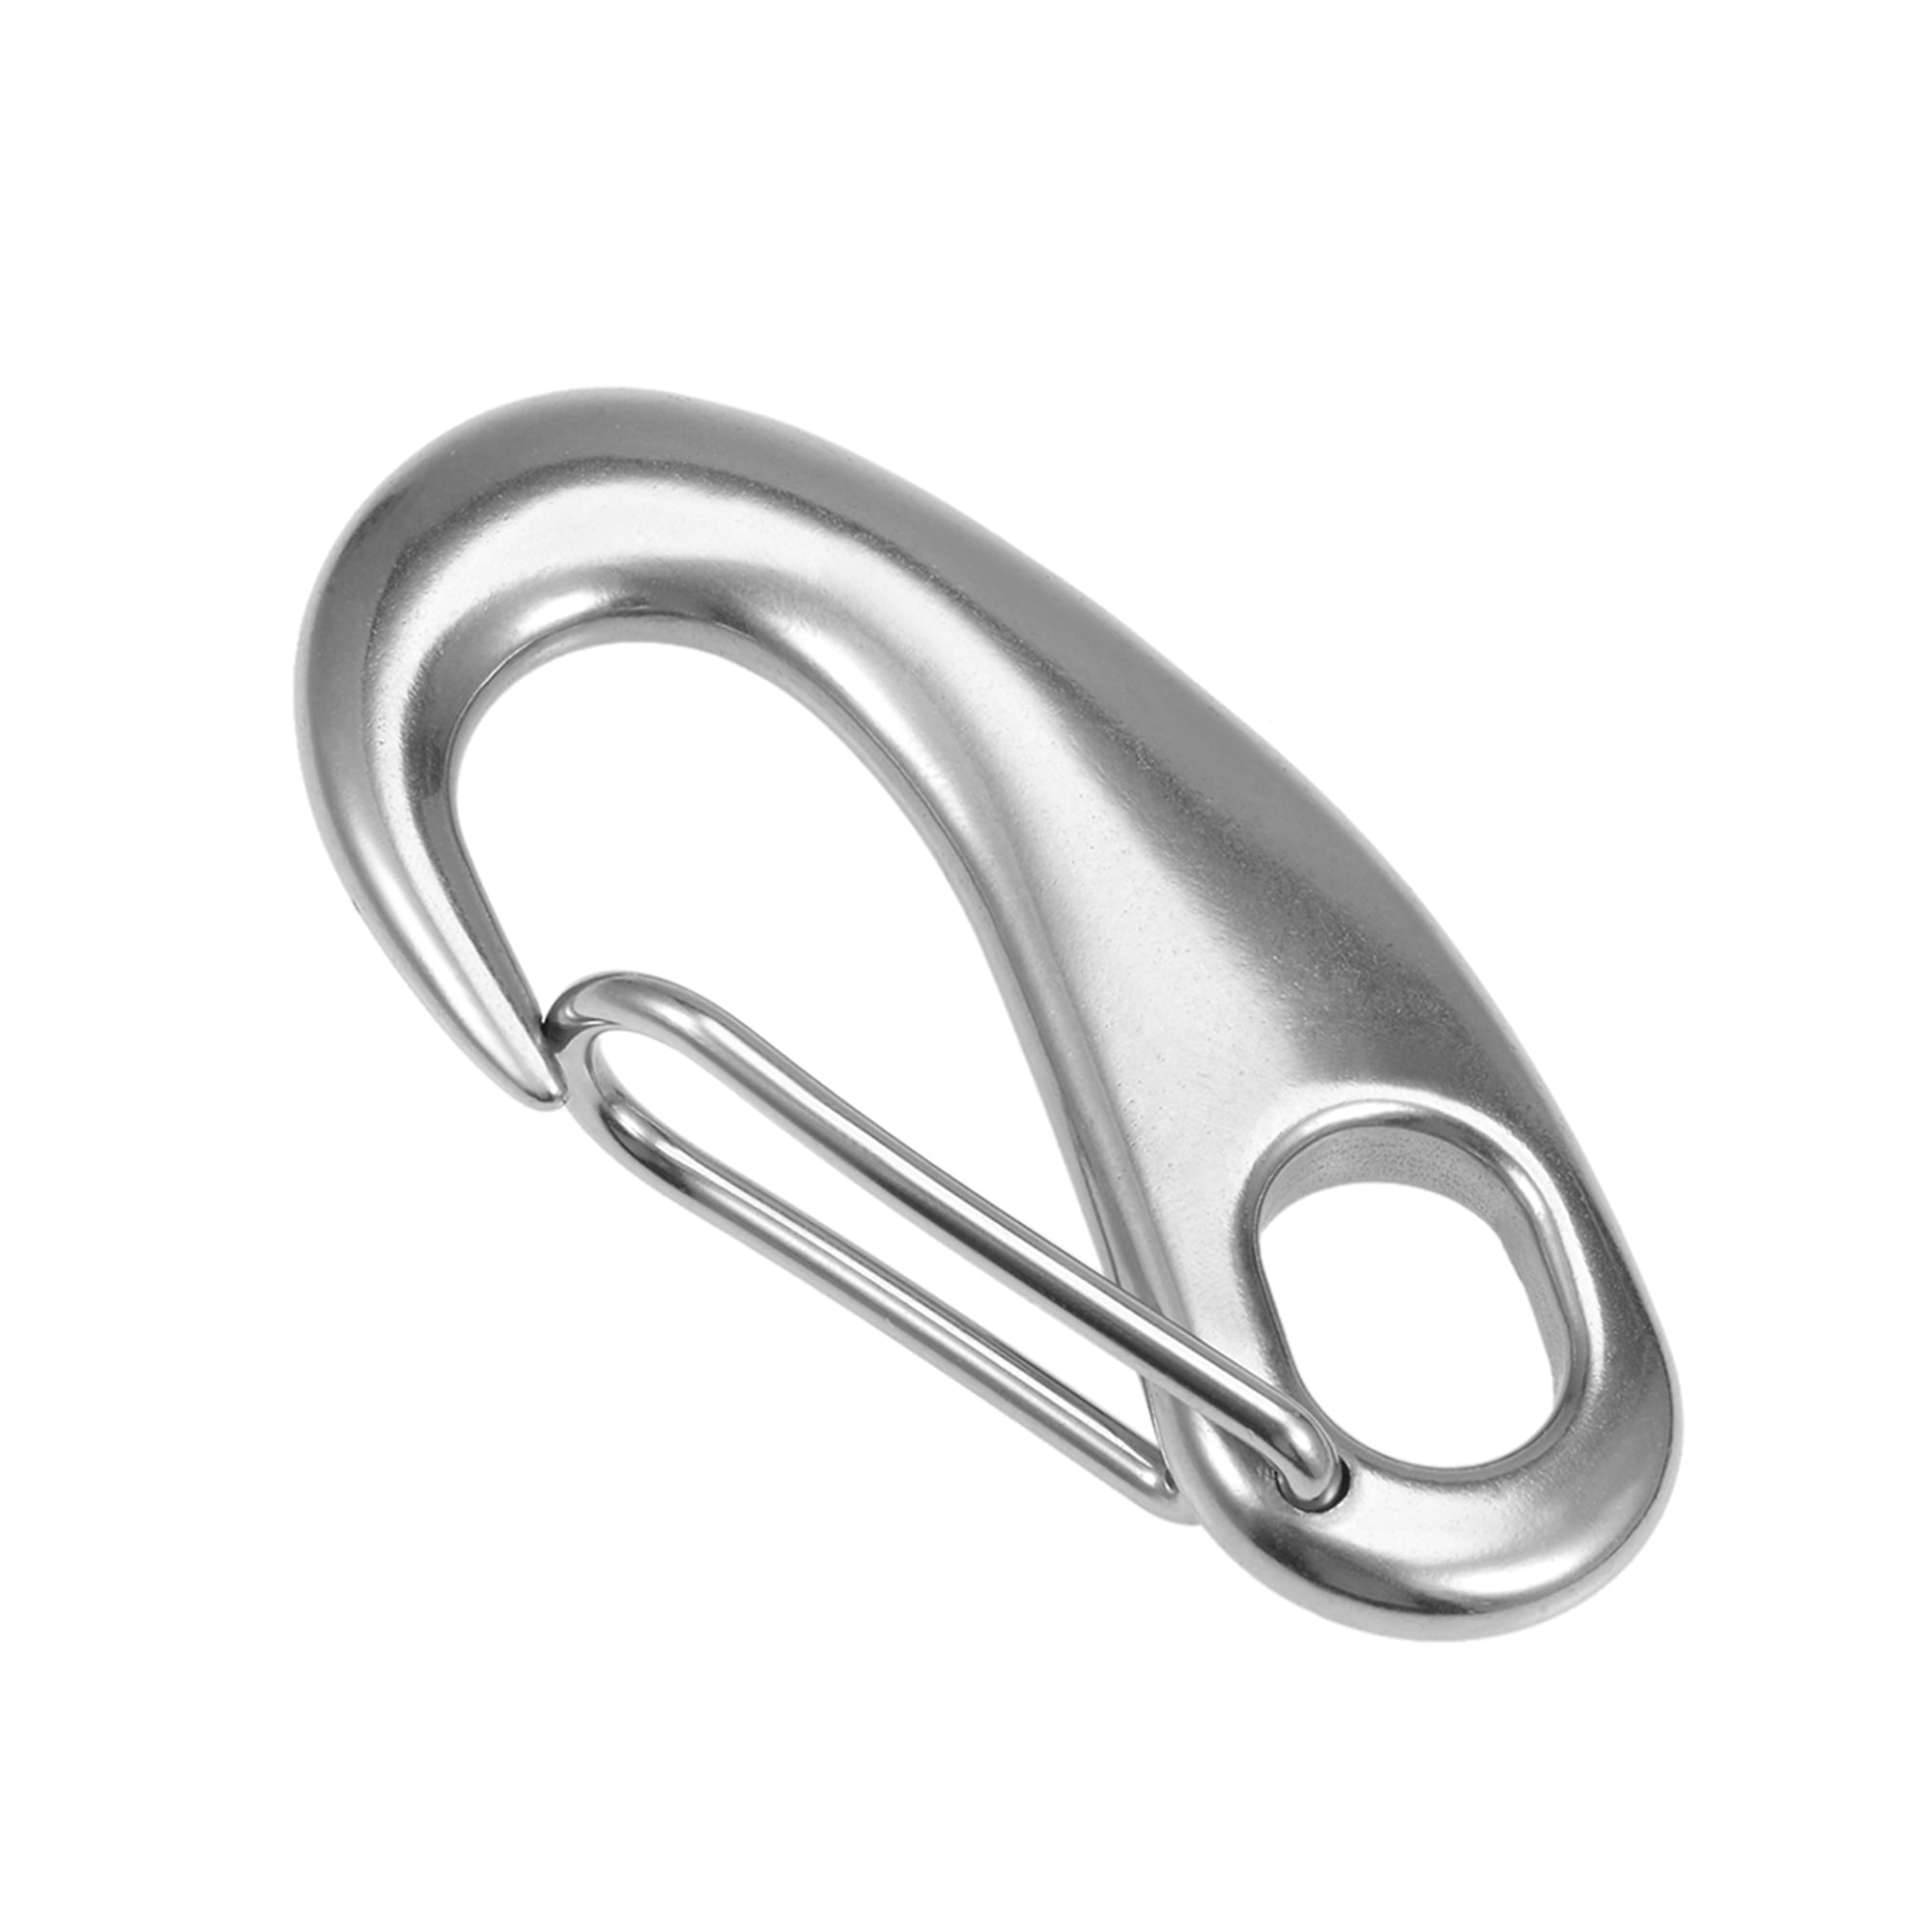 1pc Aluminum Alloy Material Snap Clip Hook Carabiner Spring Loaded Wire Gates